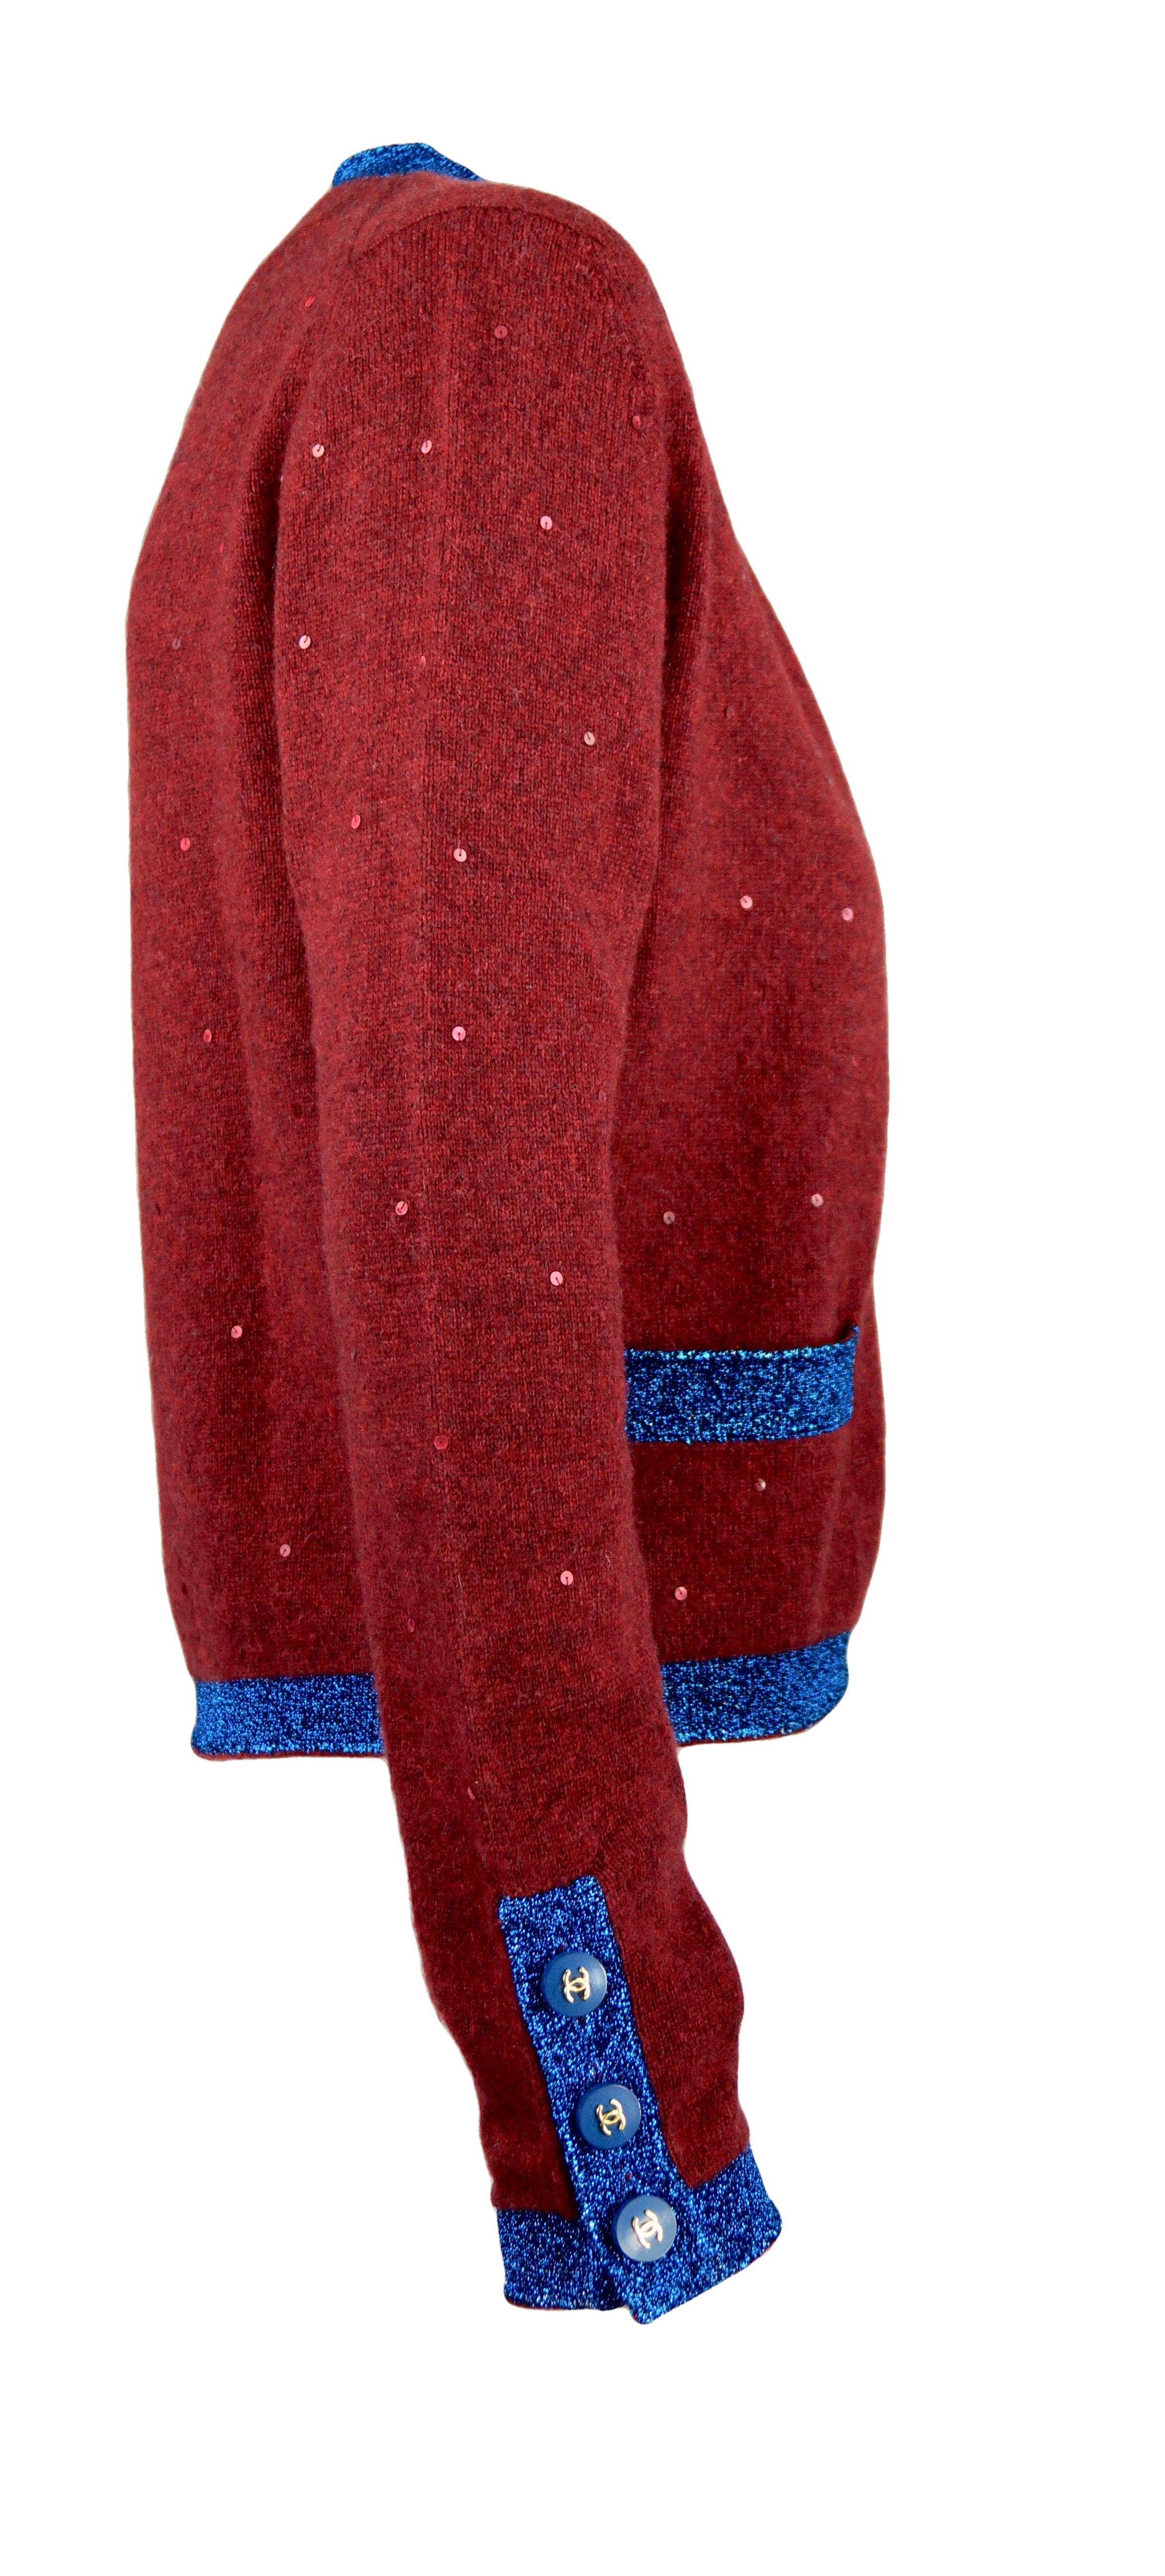 
Chanel twin set  Fall 1996 collection
Cardigan and shirt 1/2 sleeves in rust red cashmere with micro sequins. Bright electric blue gaskets. Logo buttons.
Size FR 40
Made in the United Kingdom
100% cashmere
Insert: 65% viscose 35%